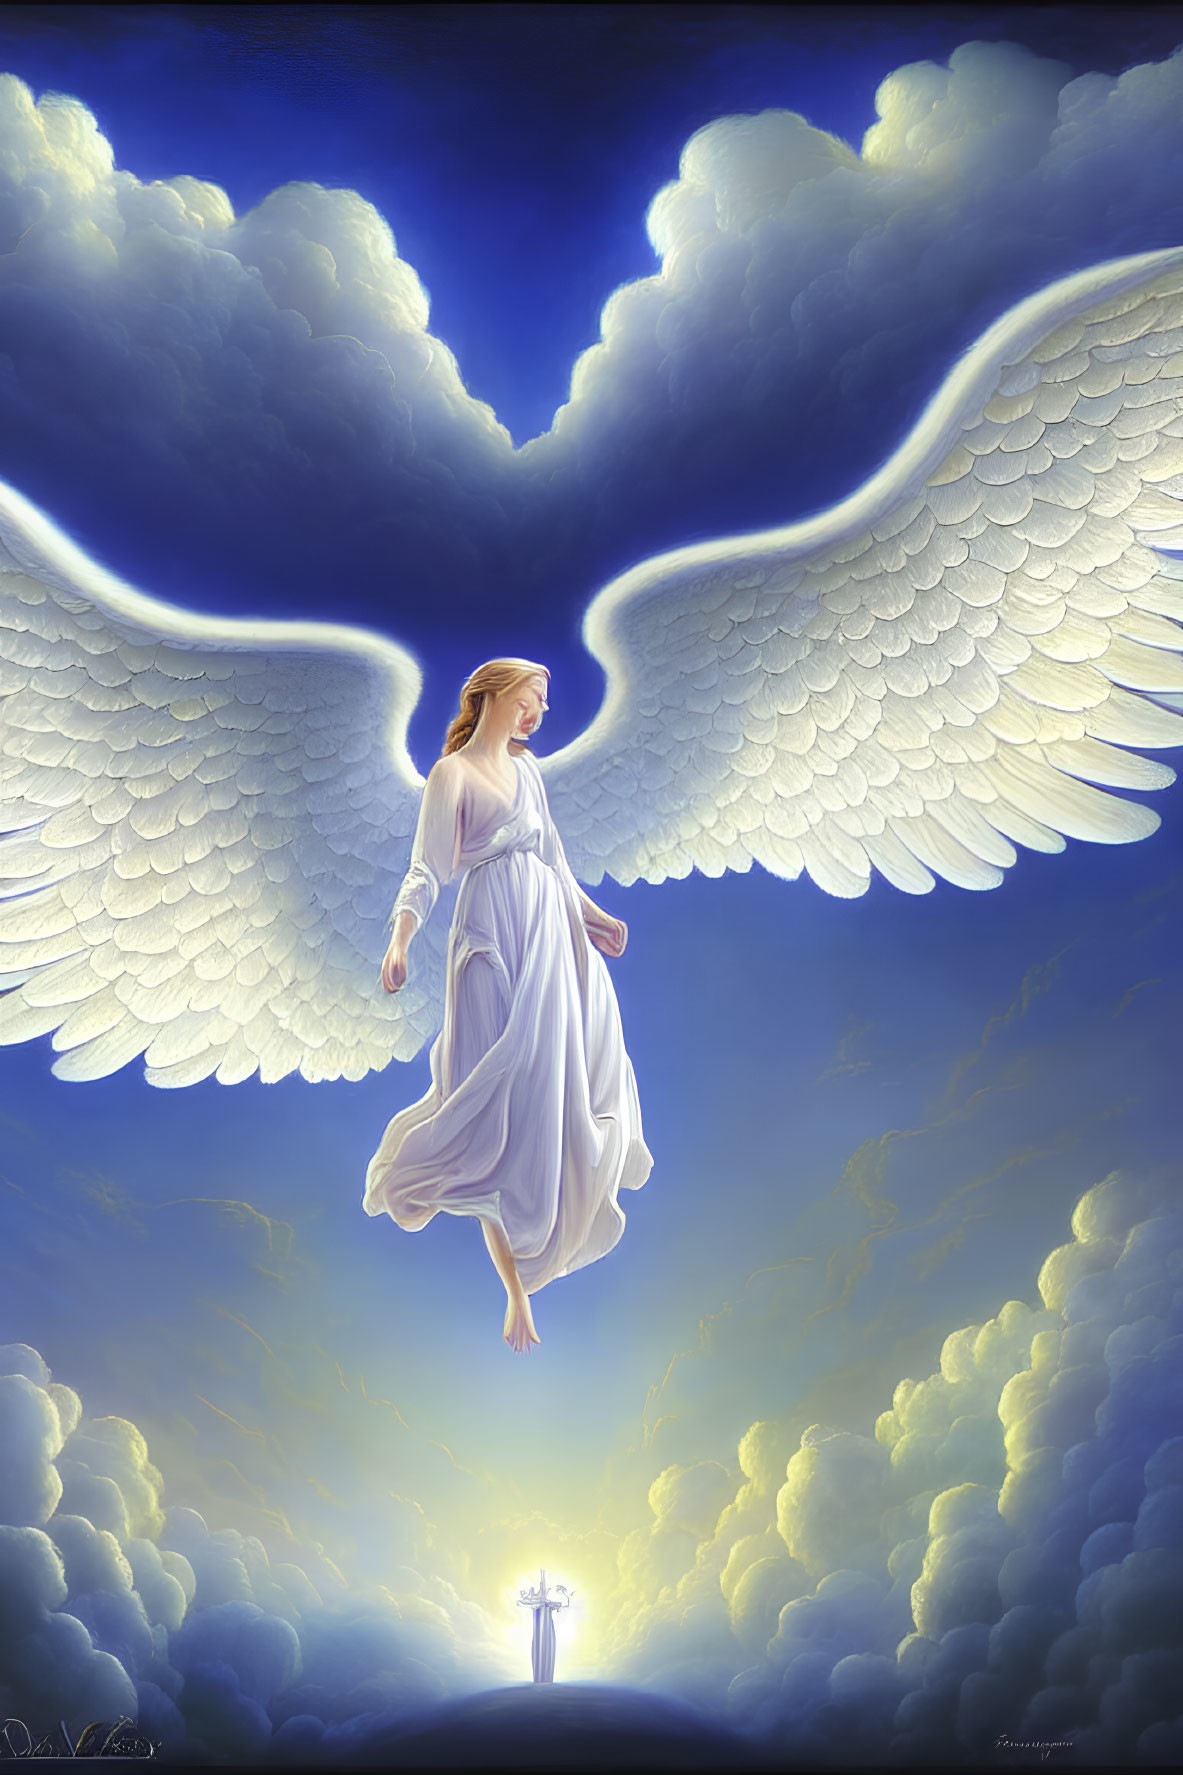 Angel with white wings descending to divine sword in sky